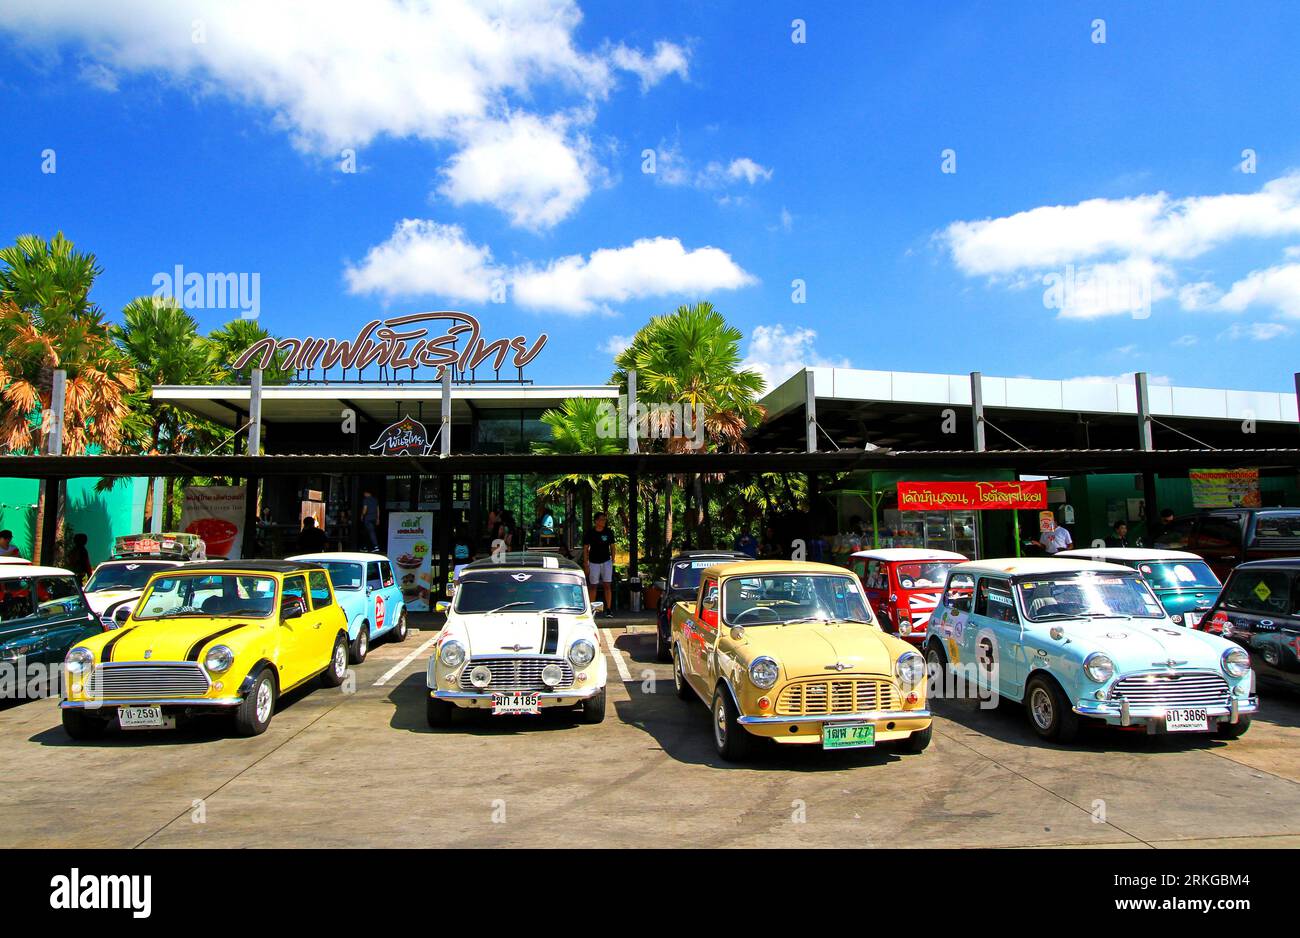 An array of vintage Mini Austin Coopers in a variety of colors are parked along the side of a street Stock Photo